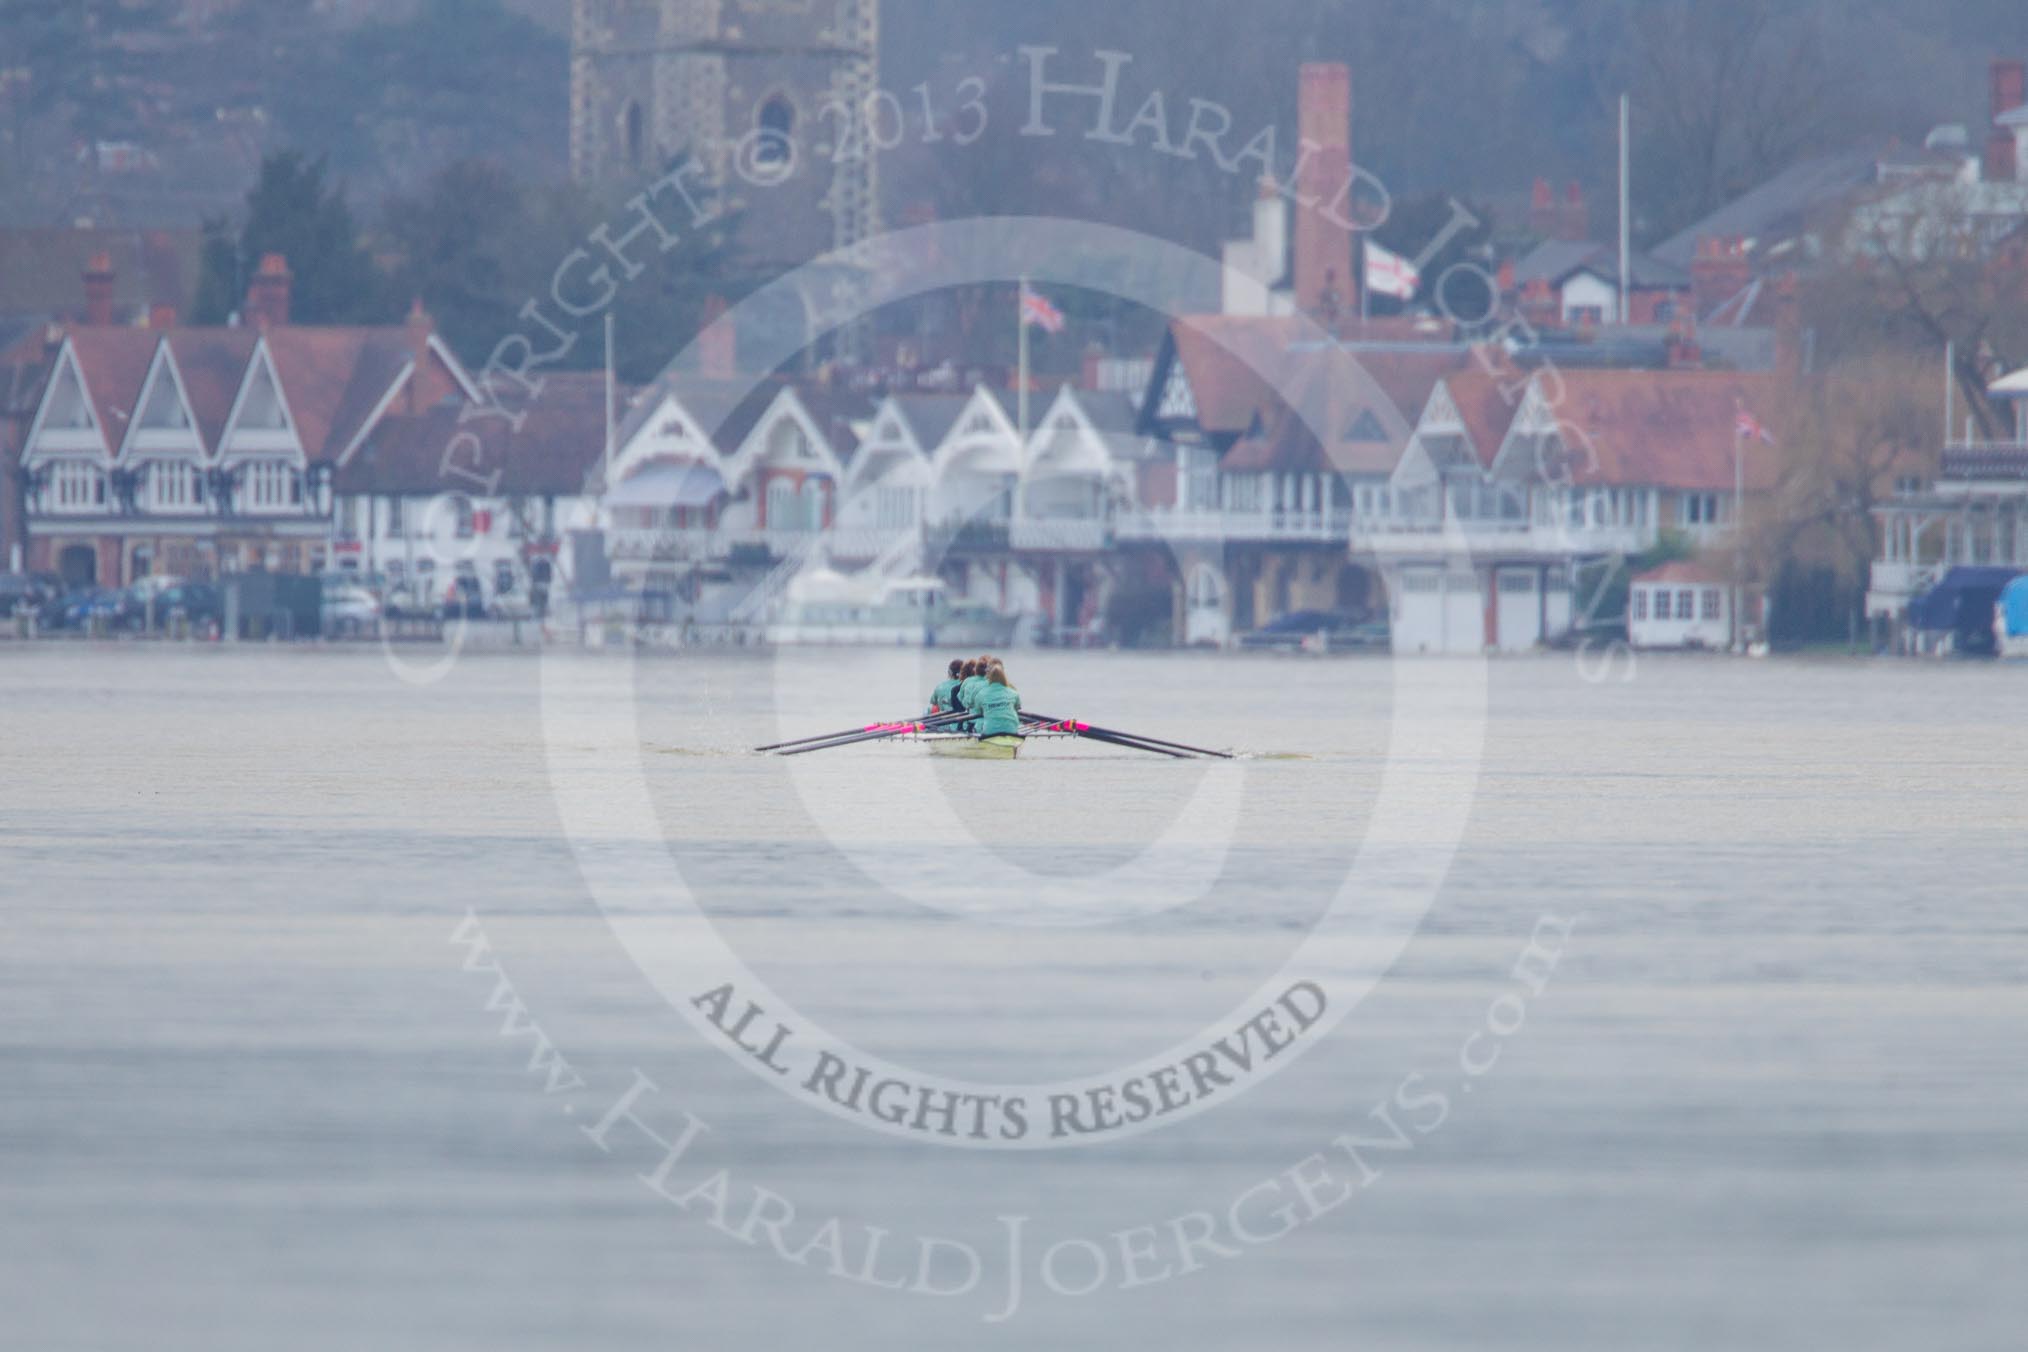 The Boat Race season 2013 - CUWBC training: The CUWBC Blue Boat on the way down the Thames, with Henley-on-Thames as backdrop..
River Thames near Remenham,
Henley-on-Thames,
Oxfordshire,
United Kingdom,
on 19 March 2013 at 15:30, image #18